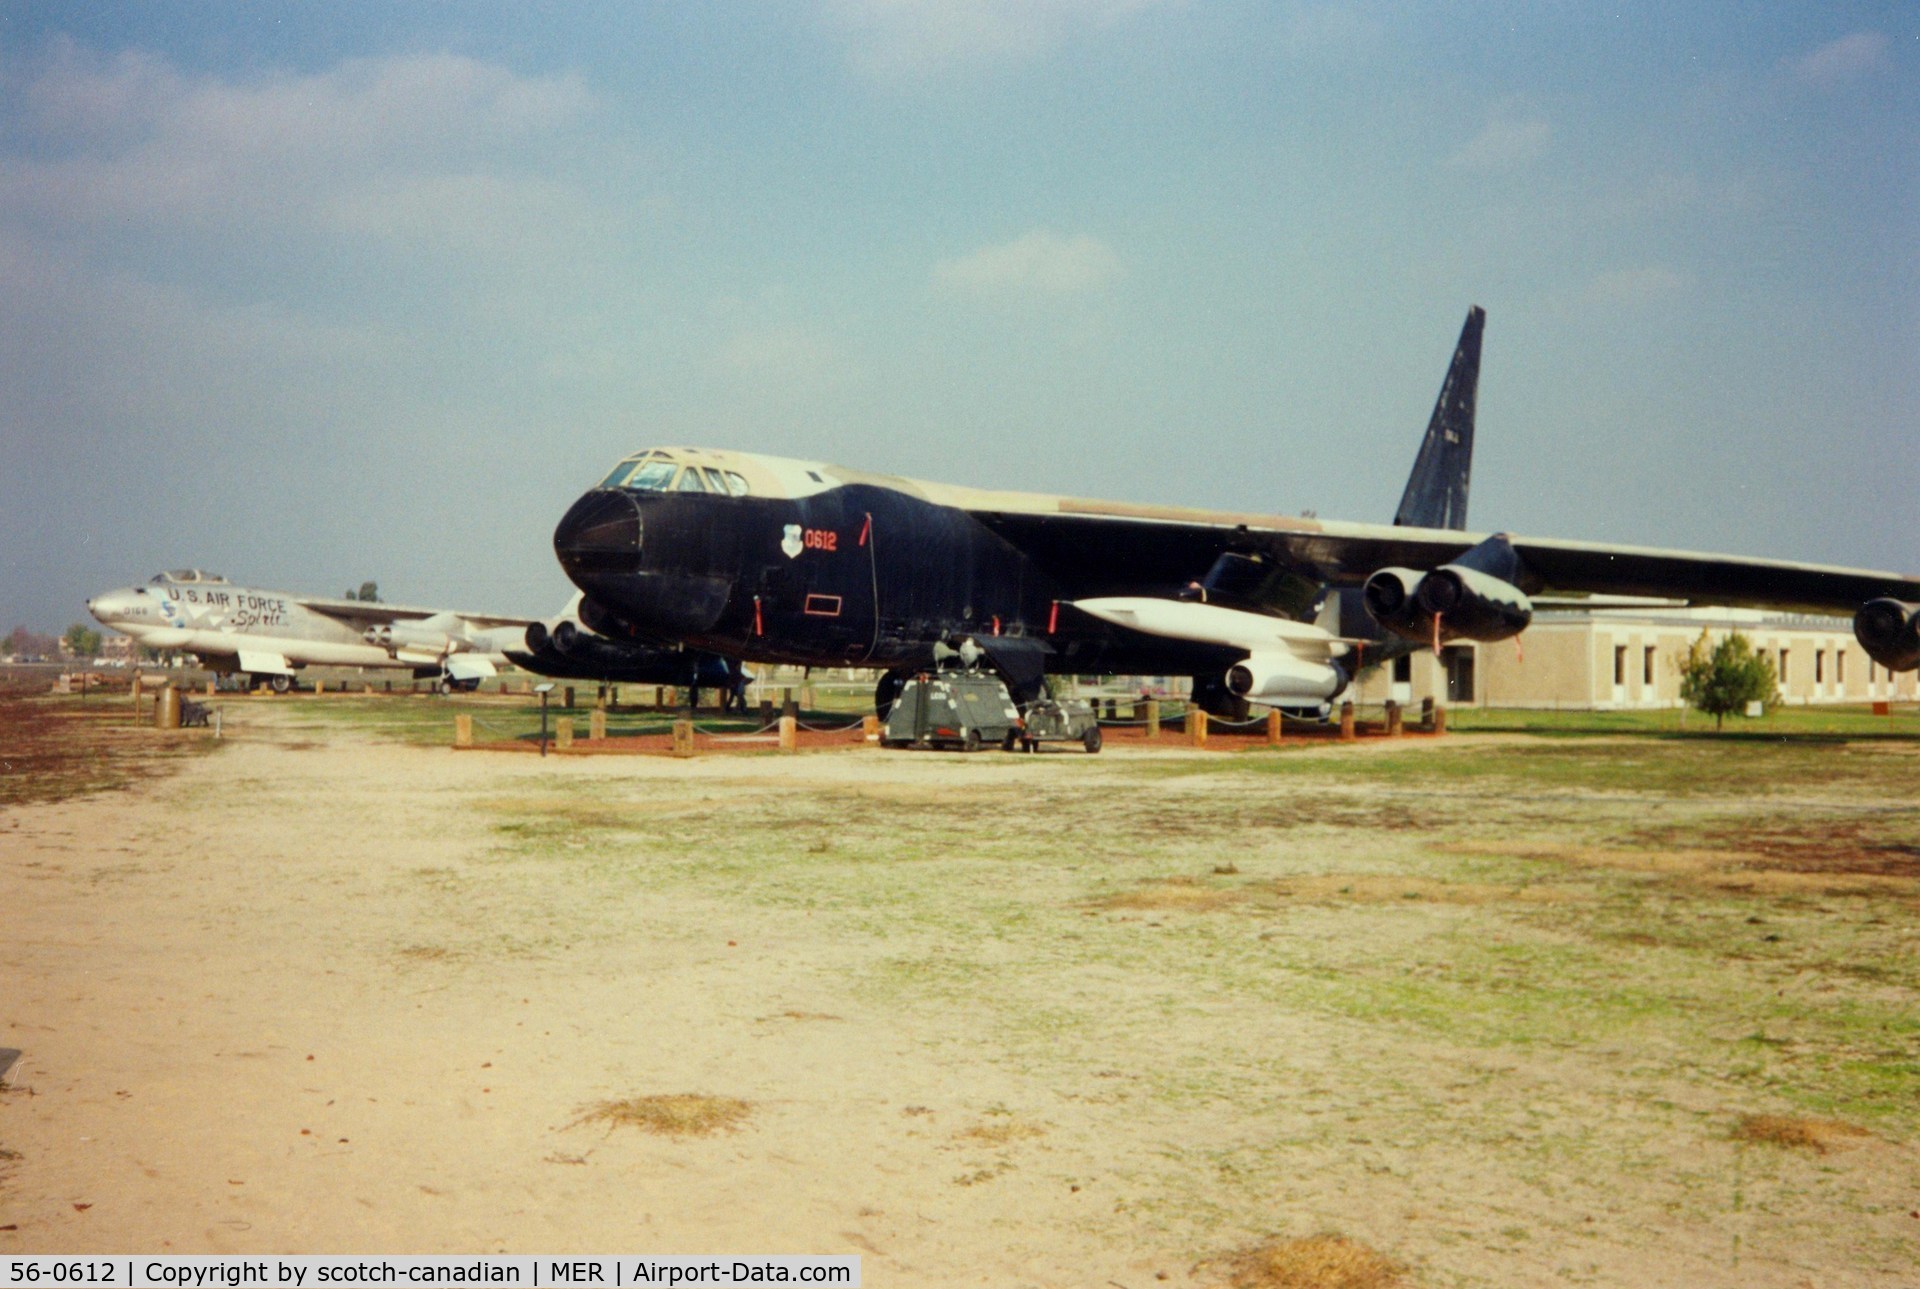 56-0612, 1957 Boeing B-52D-80-BO Stratofortress C/N 17295, 1957 Boeing B-52D-80-BO Stratofortress at Castle Air Museum, Atwater, CA - July 1989